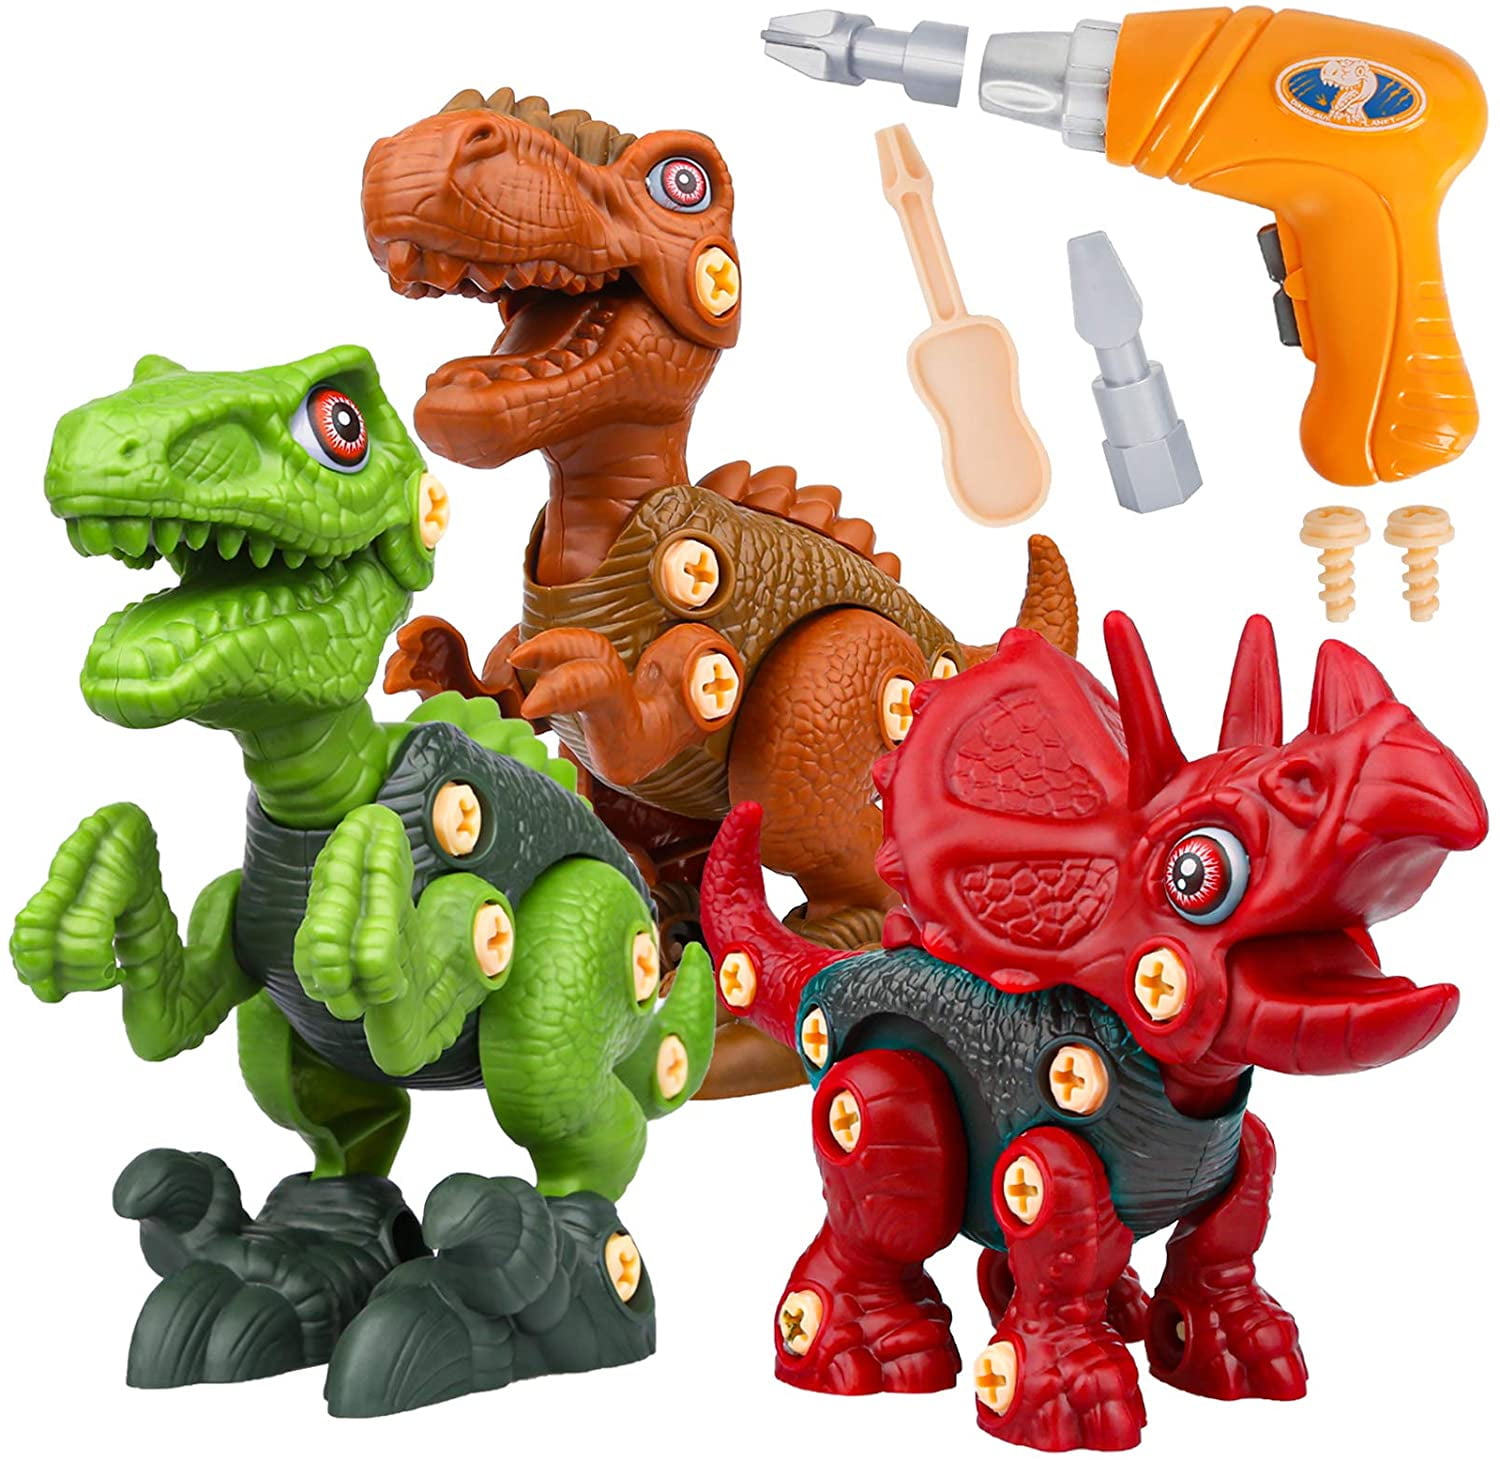 Take Apart Toys Dinosaur Play Figures with Electric Drill Kids Shooting DIY Toy 